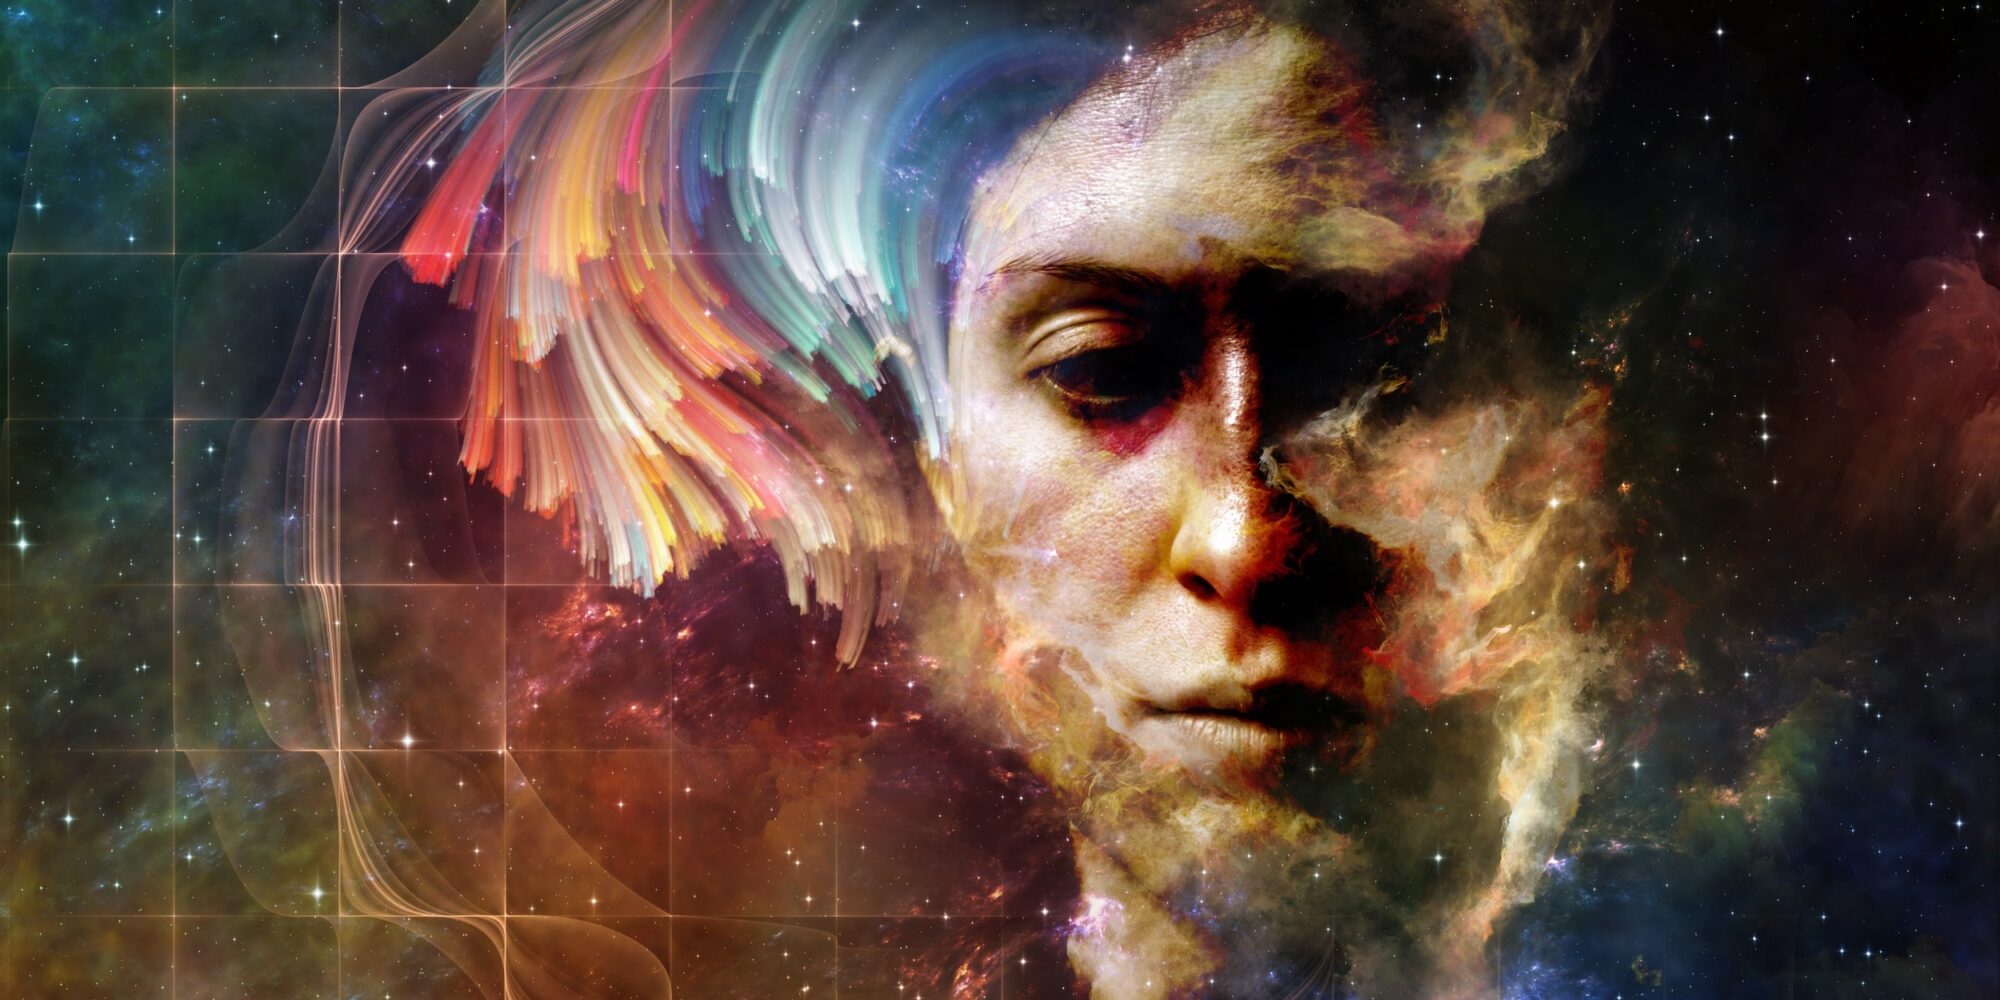 Memory of Me series. Background design of female portrait and space texture  on the subject of art, philosophy and spirituality